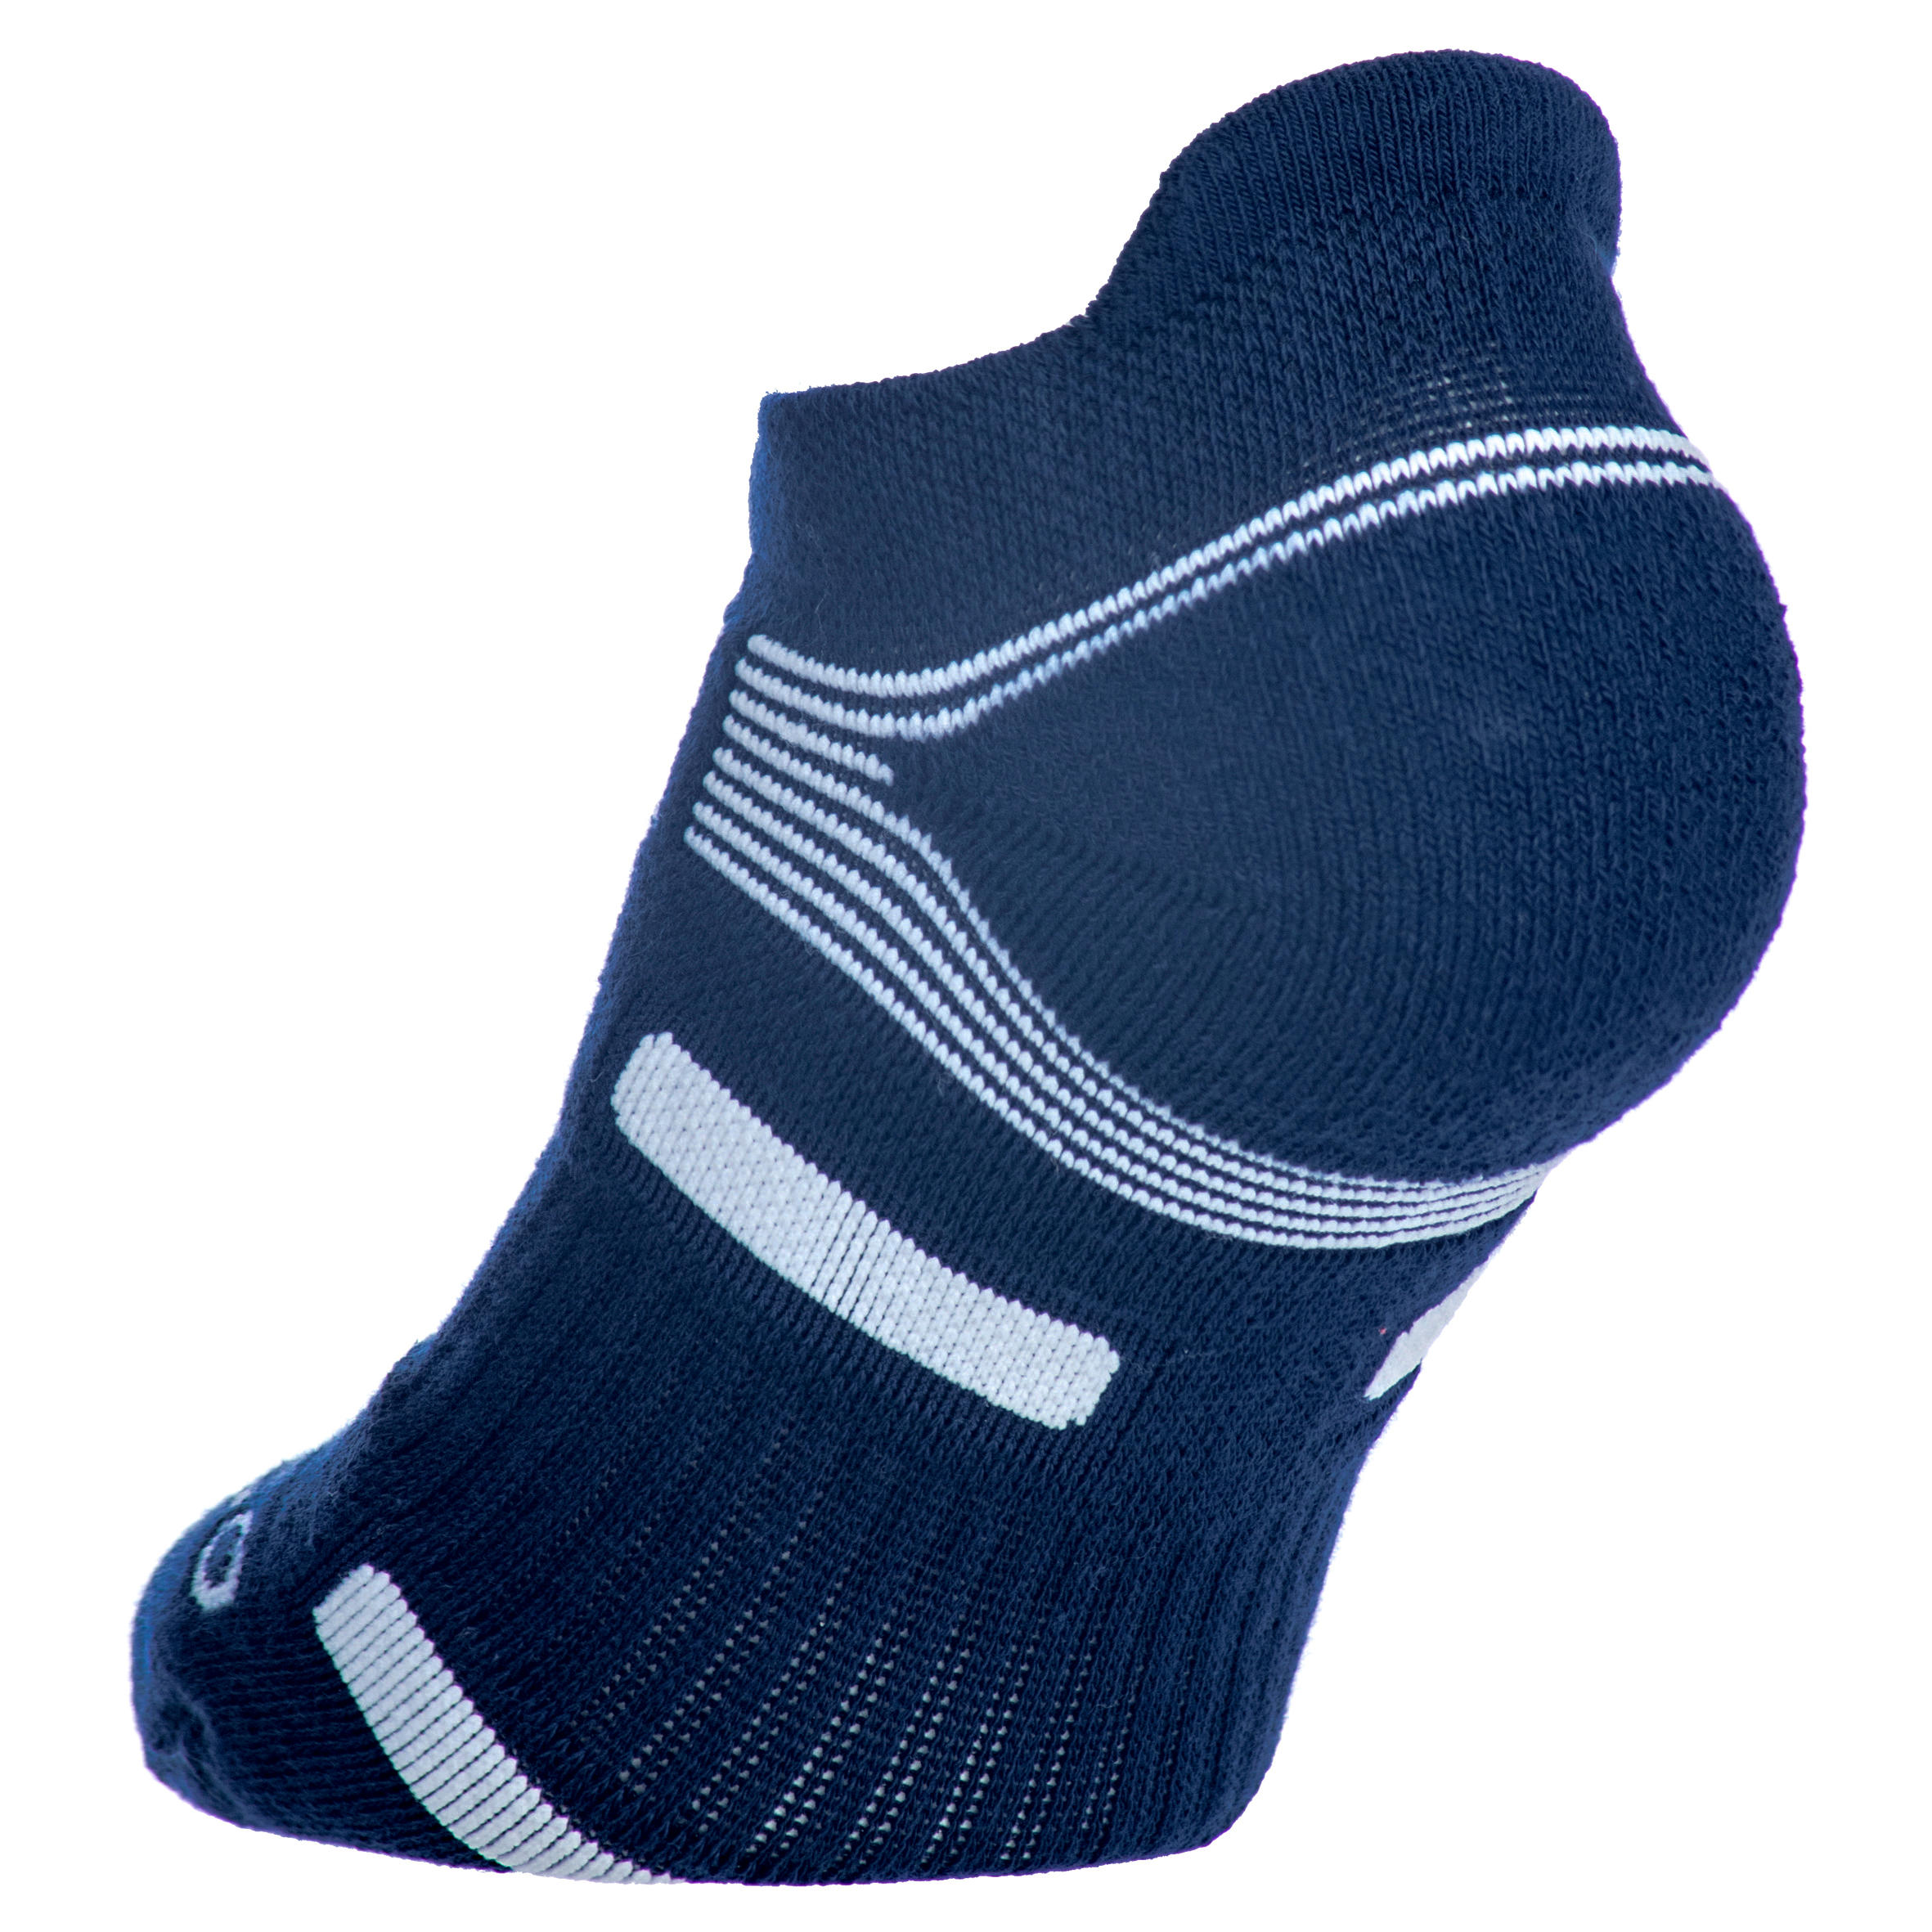 Low Sports Socks RS 560 Tri-Pack - Navy/White 10/12